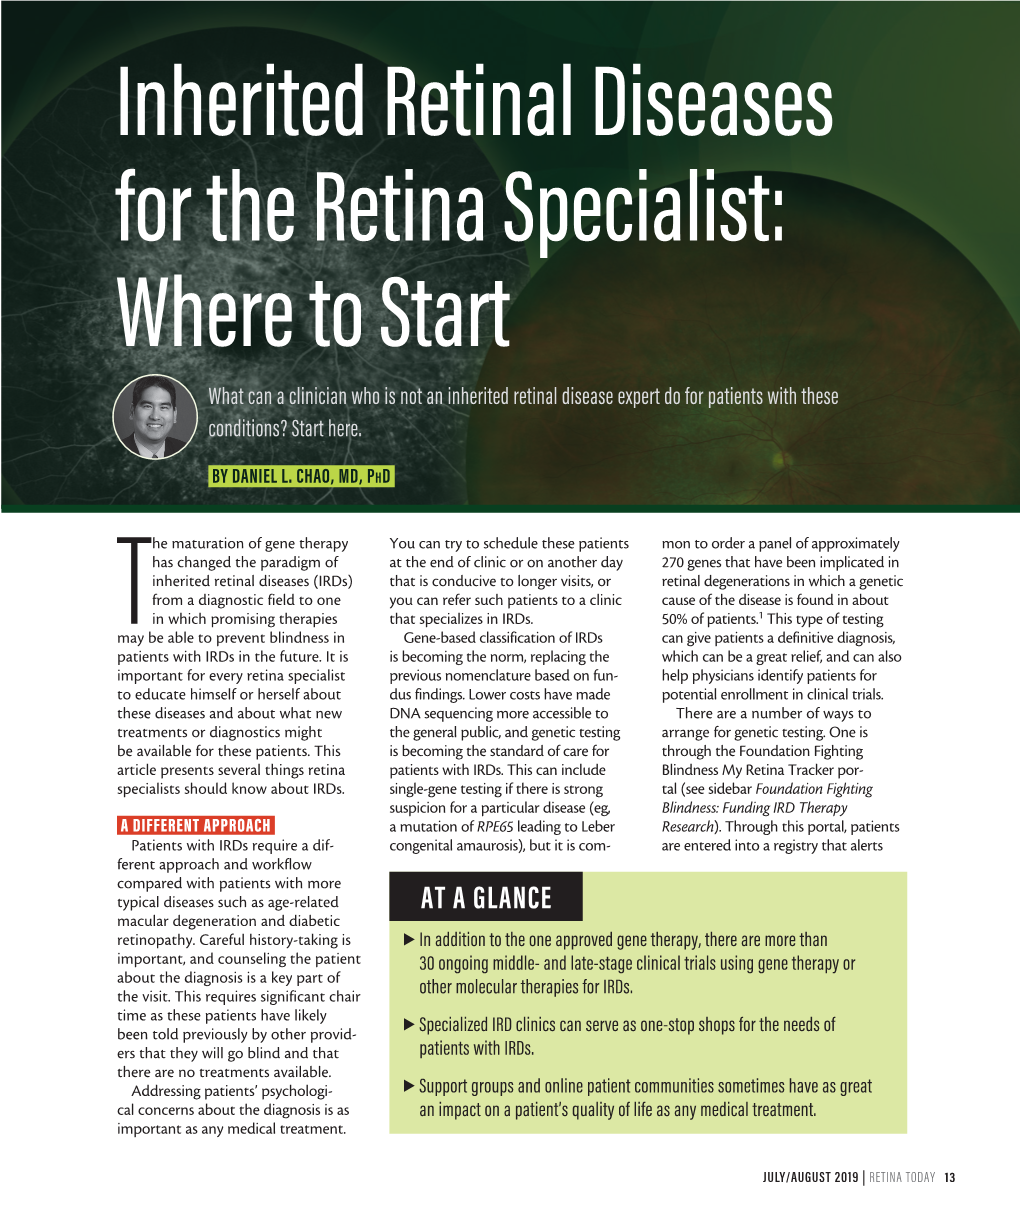 Inherited Retinal Diseases for the Retina Specialist